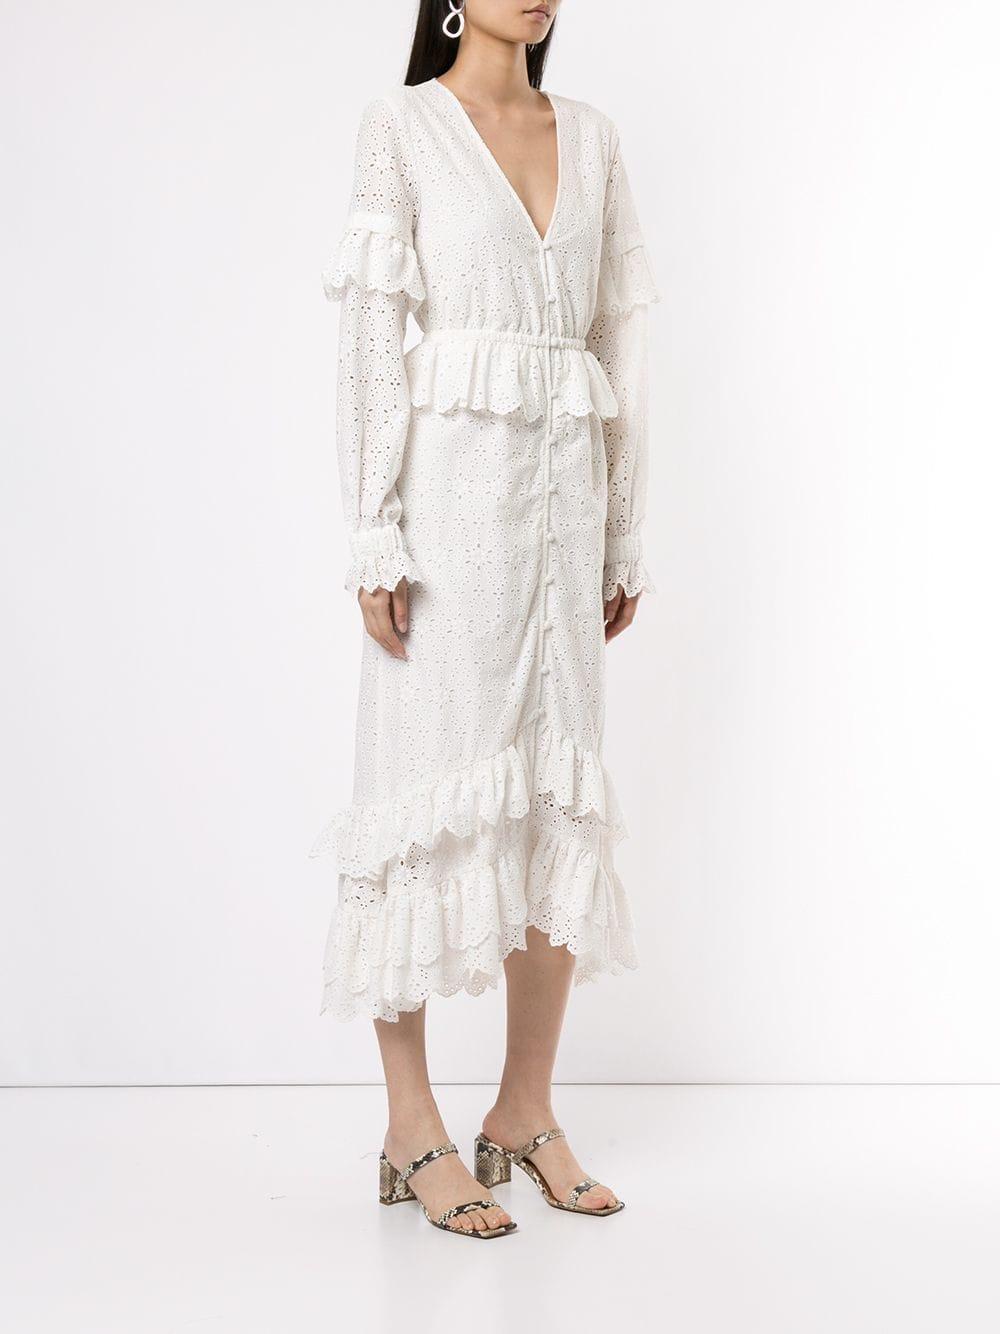 SIR Cotton Amelie Ruffle Long Dress in White - Lyst